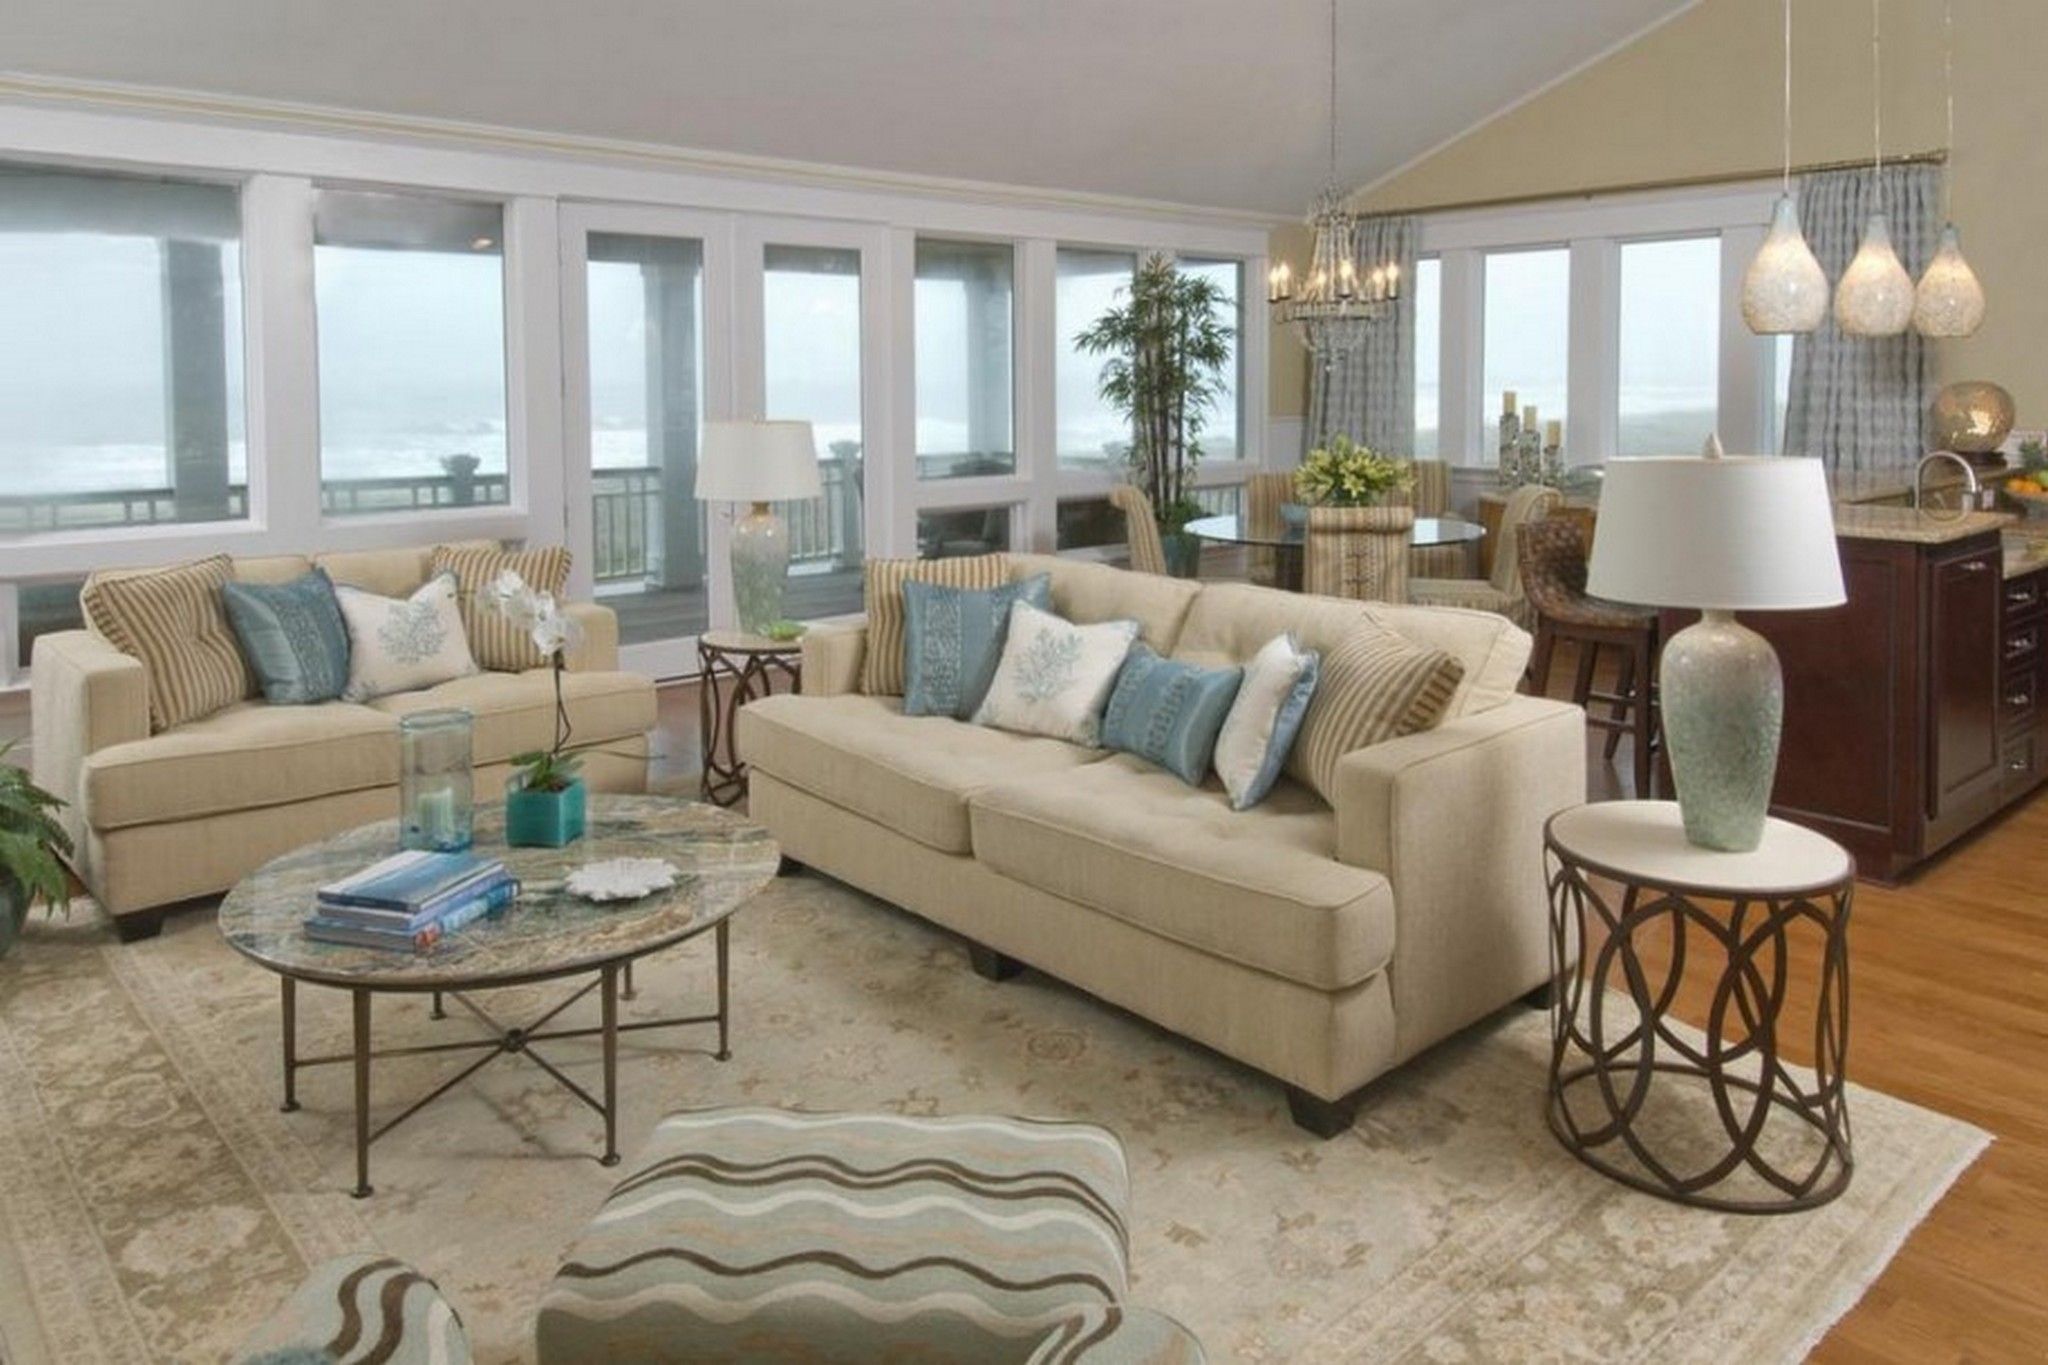 Rustic Beach Decorating Ideas For Living Room With Extra Large Rugs Intended For Coastal Living Room Table Lamps (View 11 of 15)